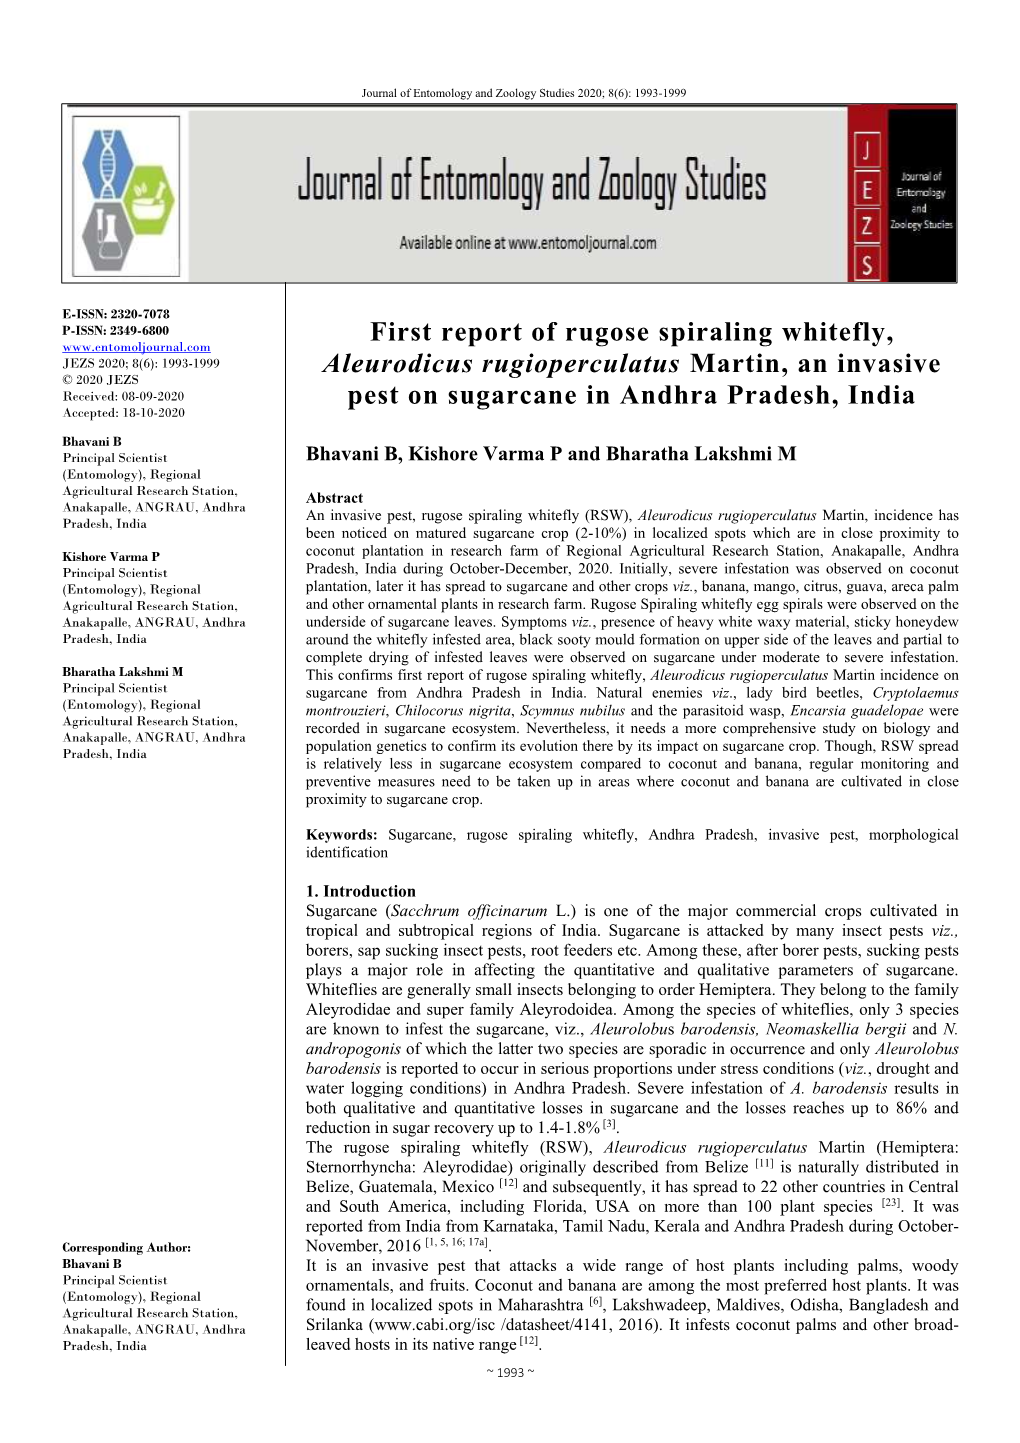 First Report of Rugose Spiraling Whitefly, Aleurodicus Rugioperculatus Martin Incidence on Principal Scientist Sugarcane from Andhra Pradesh in India